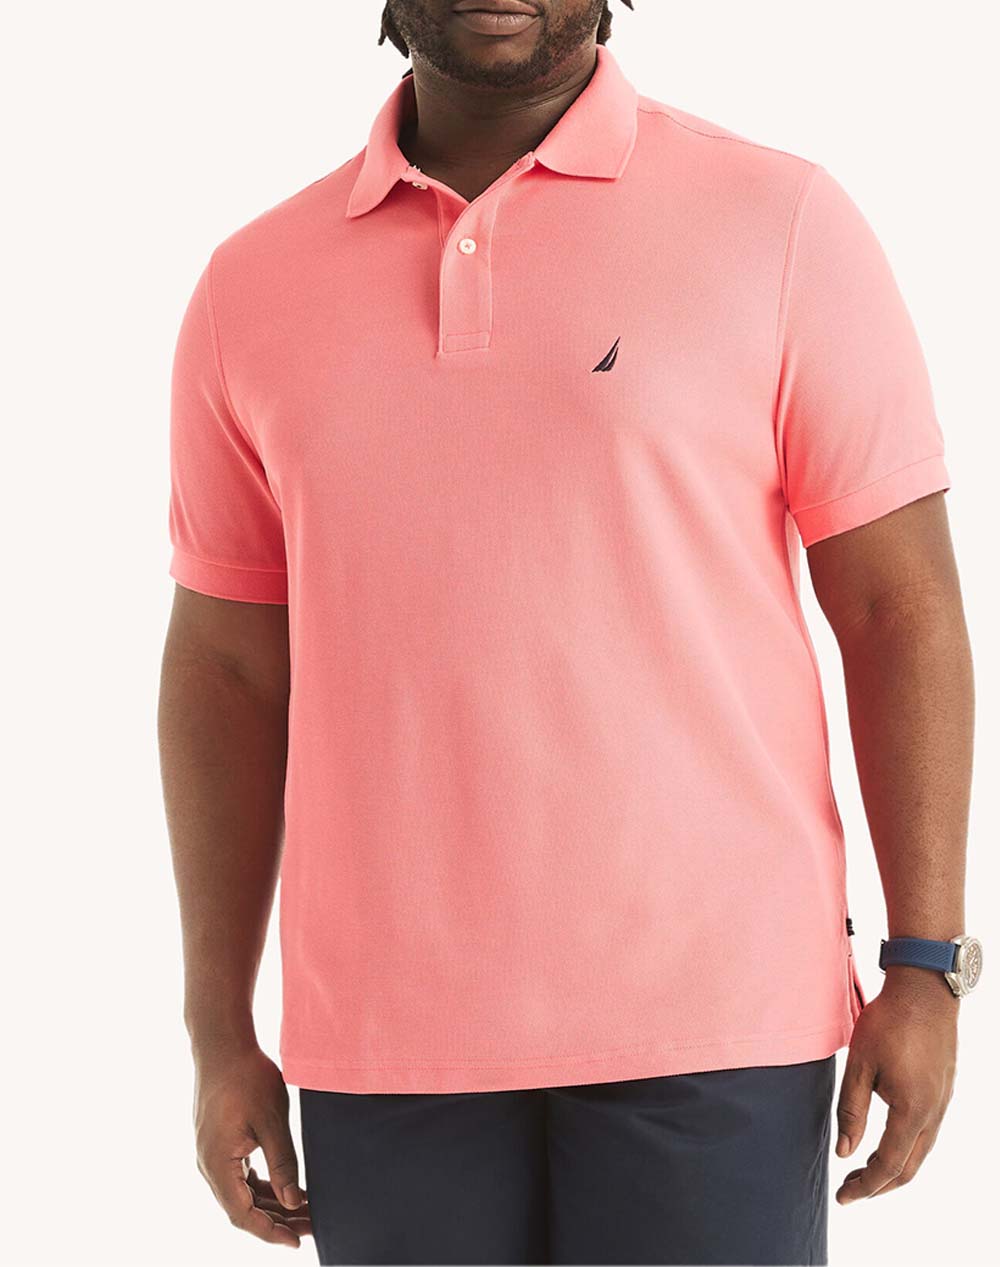 NAUTICA ΜΠΛΟΥΖΑ ΠΟΛΟ ΚΜ MENS S/S KNITTED POLO 3NCZ15101-6TH Coral 3820BNAUT3410091_XR05698